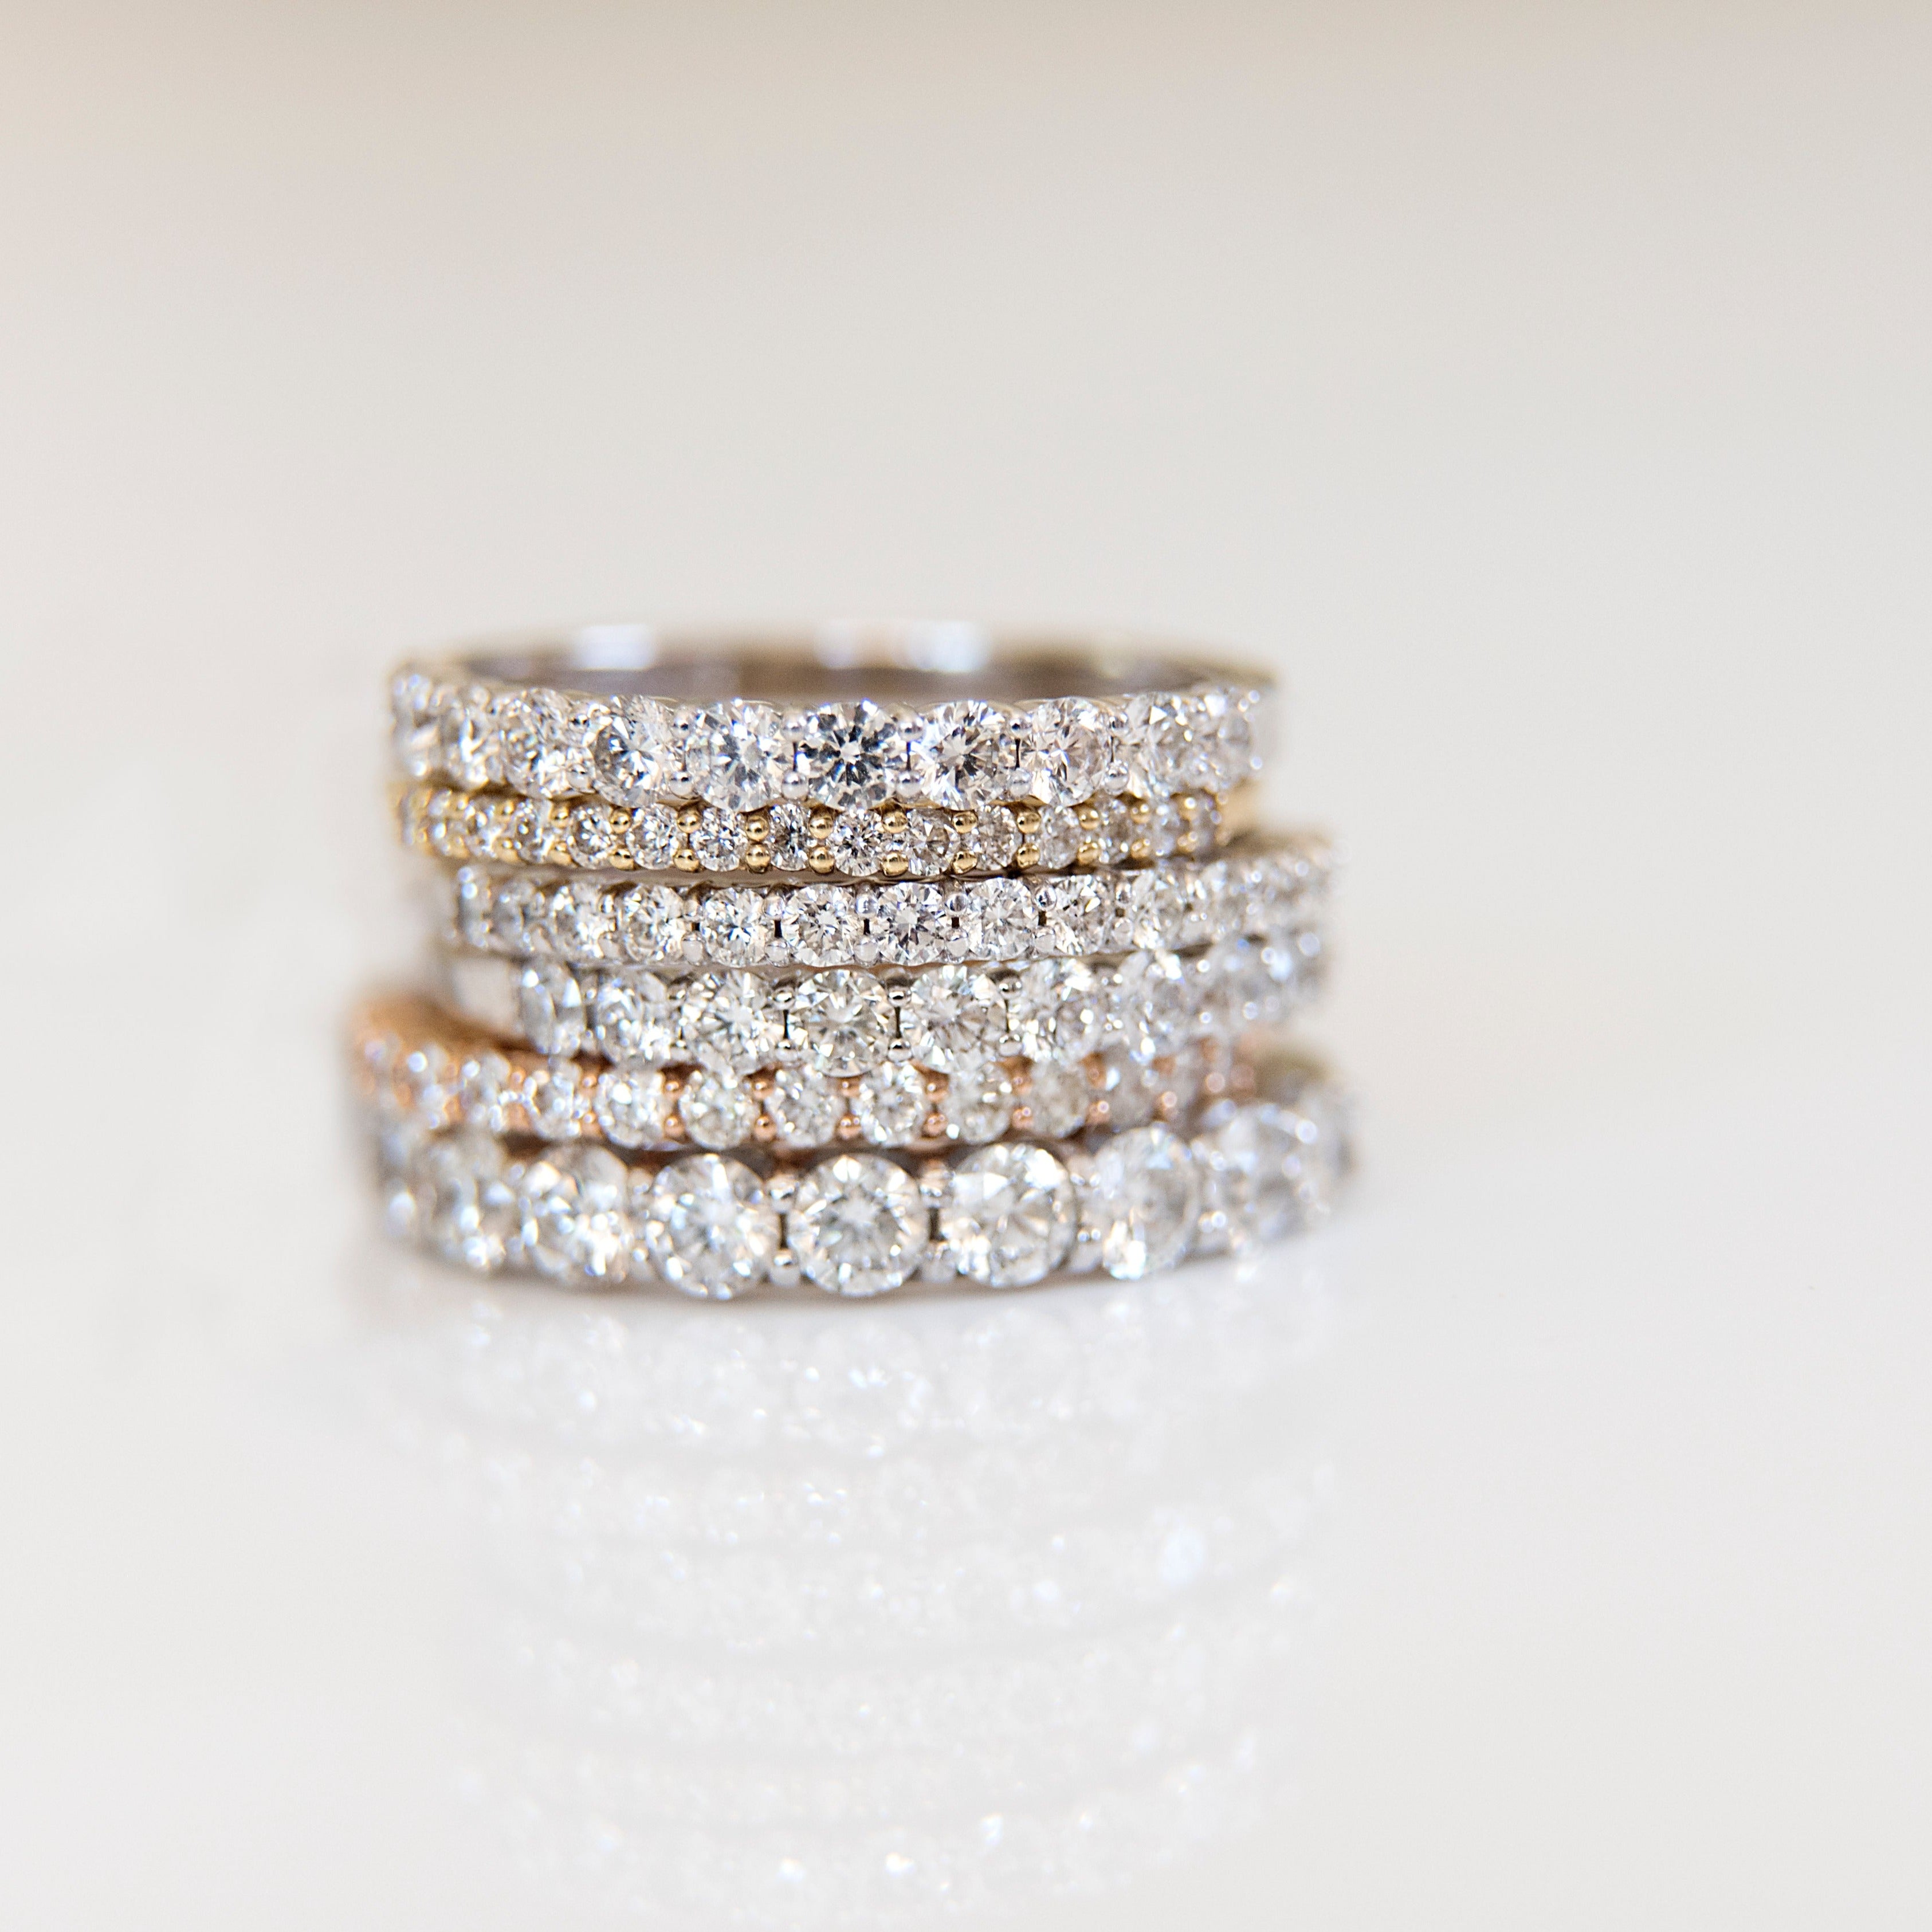 Stack of various sized diamond eternity bands.